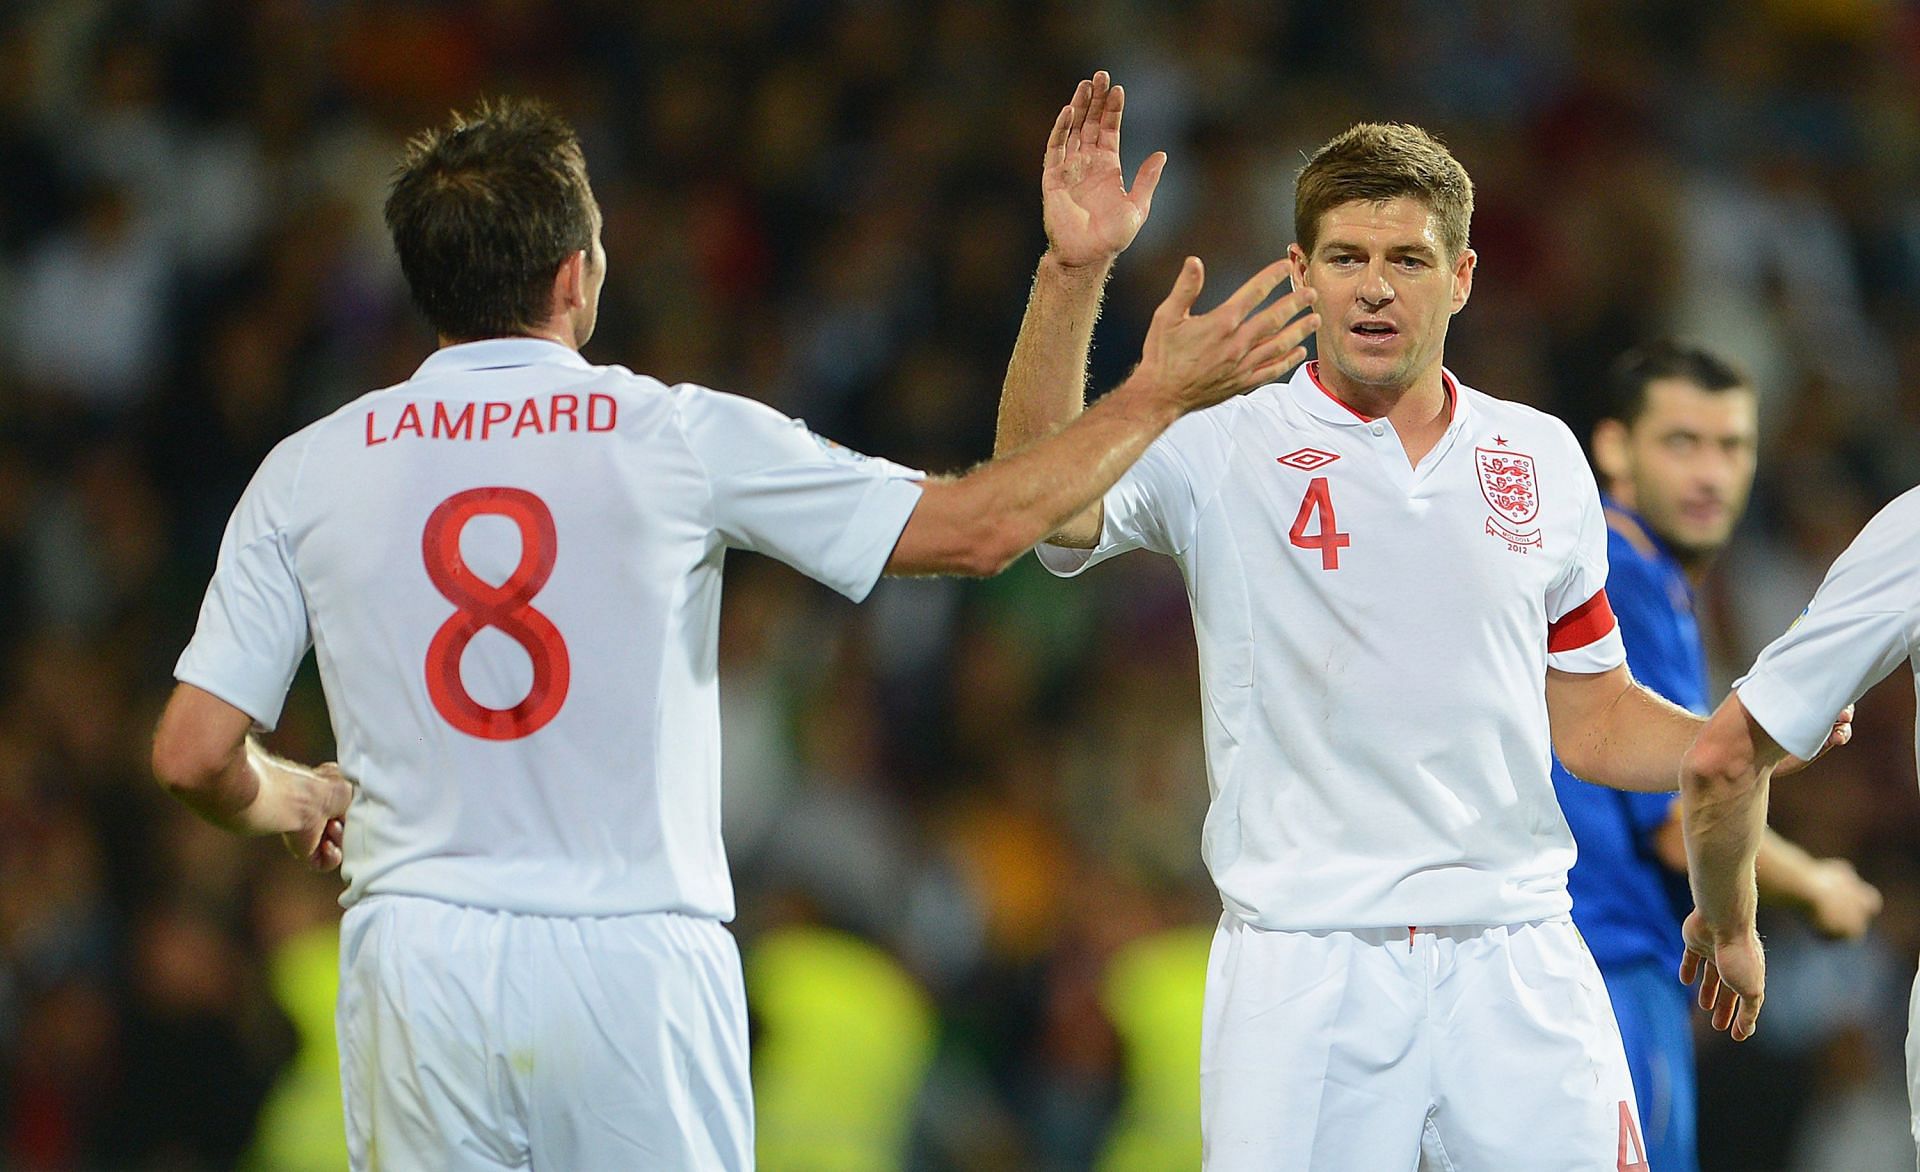 Englands two midfielders, wearing four and eight.